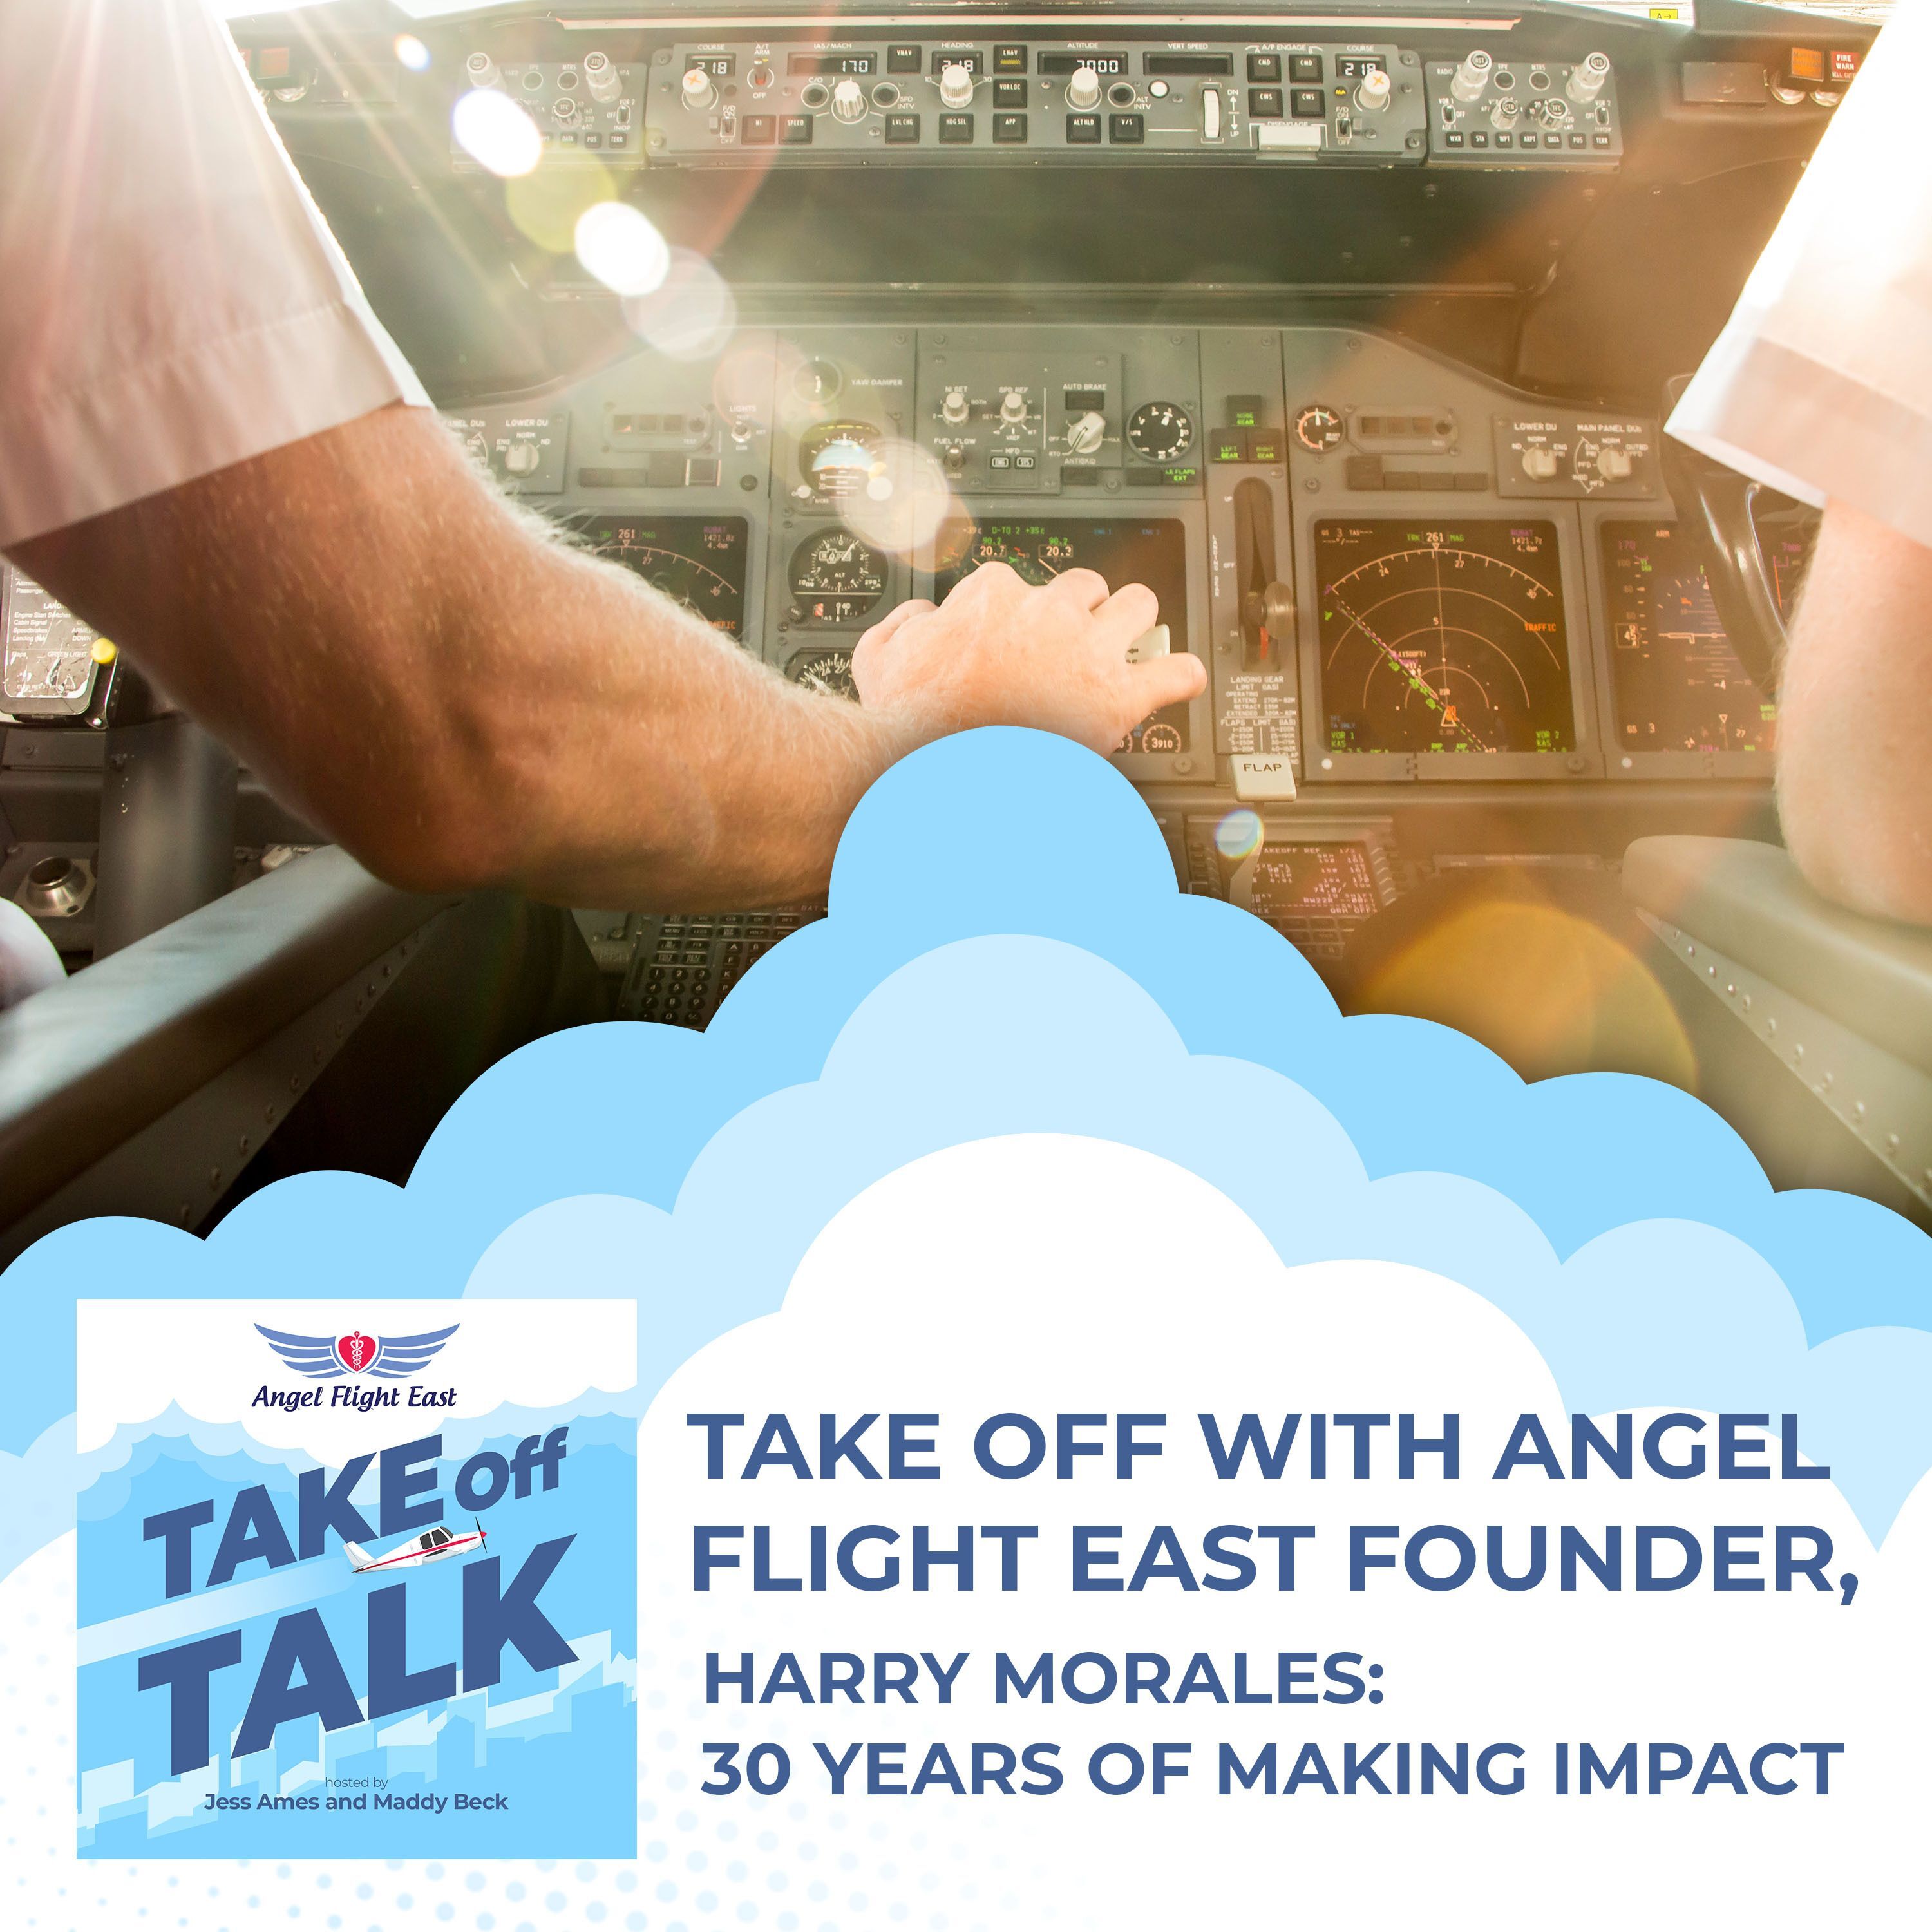 Take Off With Angel Flight East Founder, Harry Morales: 30 Years Of Making Impact